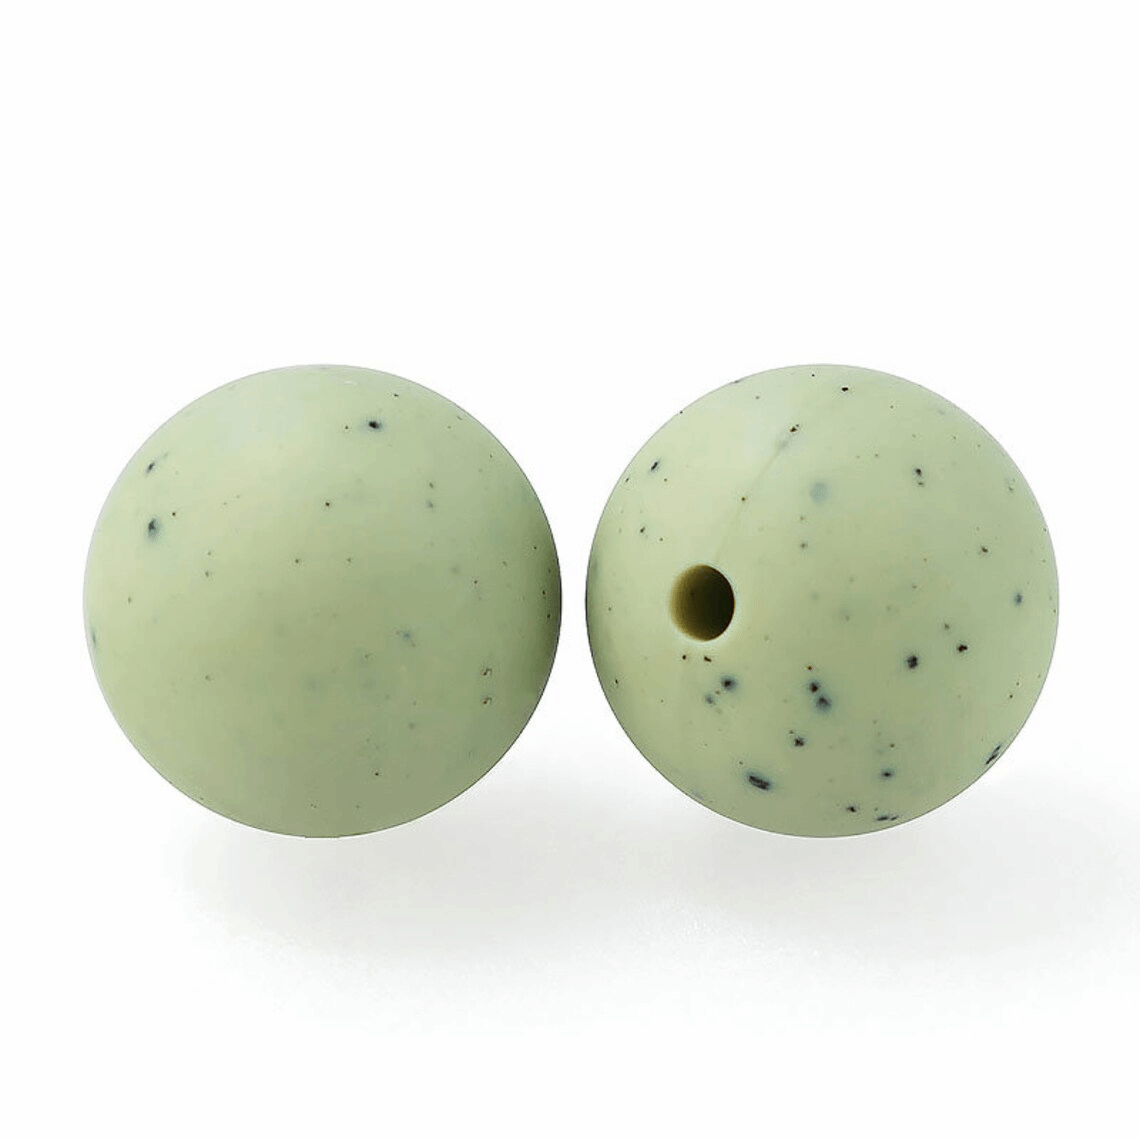 15mm Gritty/Speckle Silicone Beads - Round